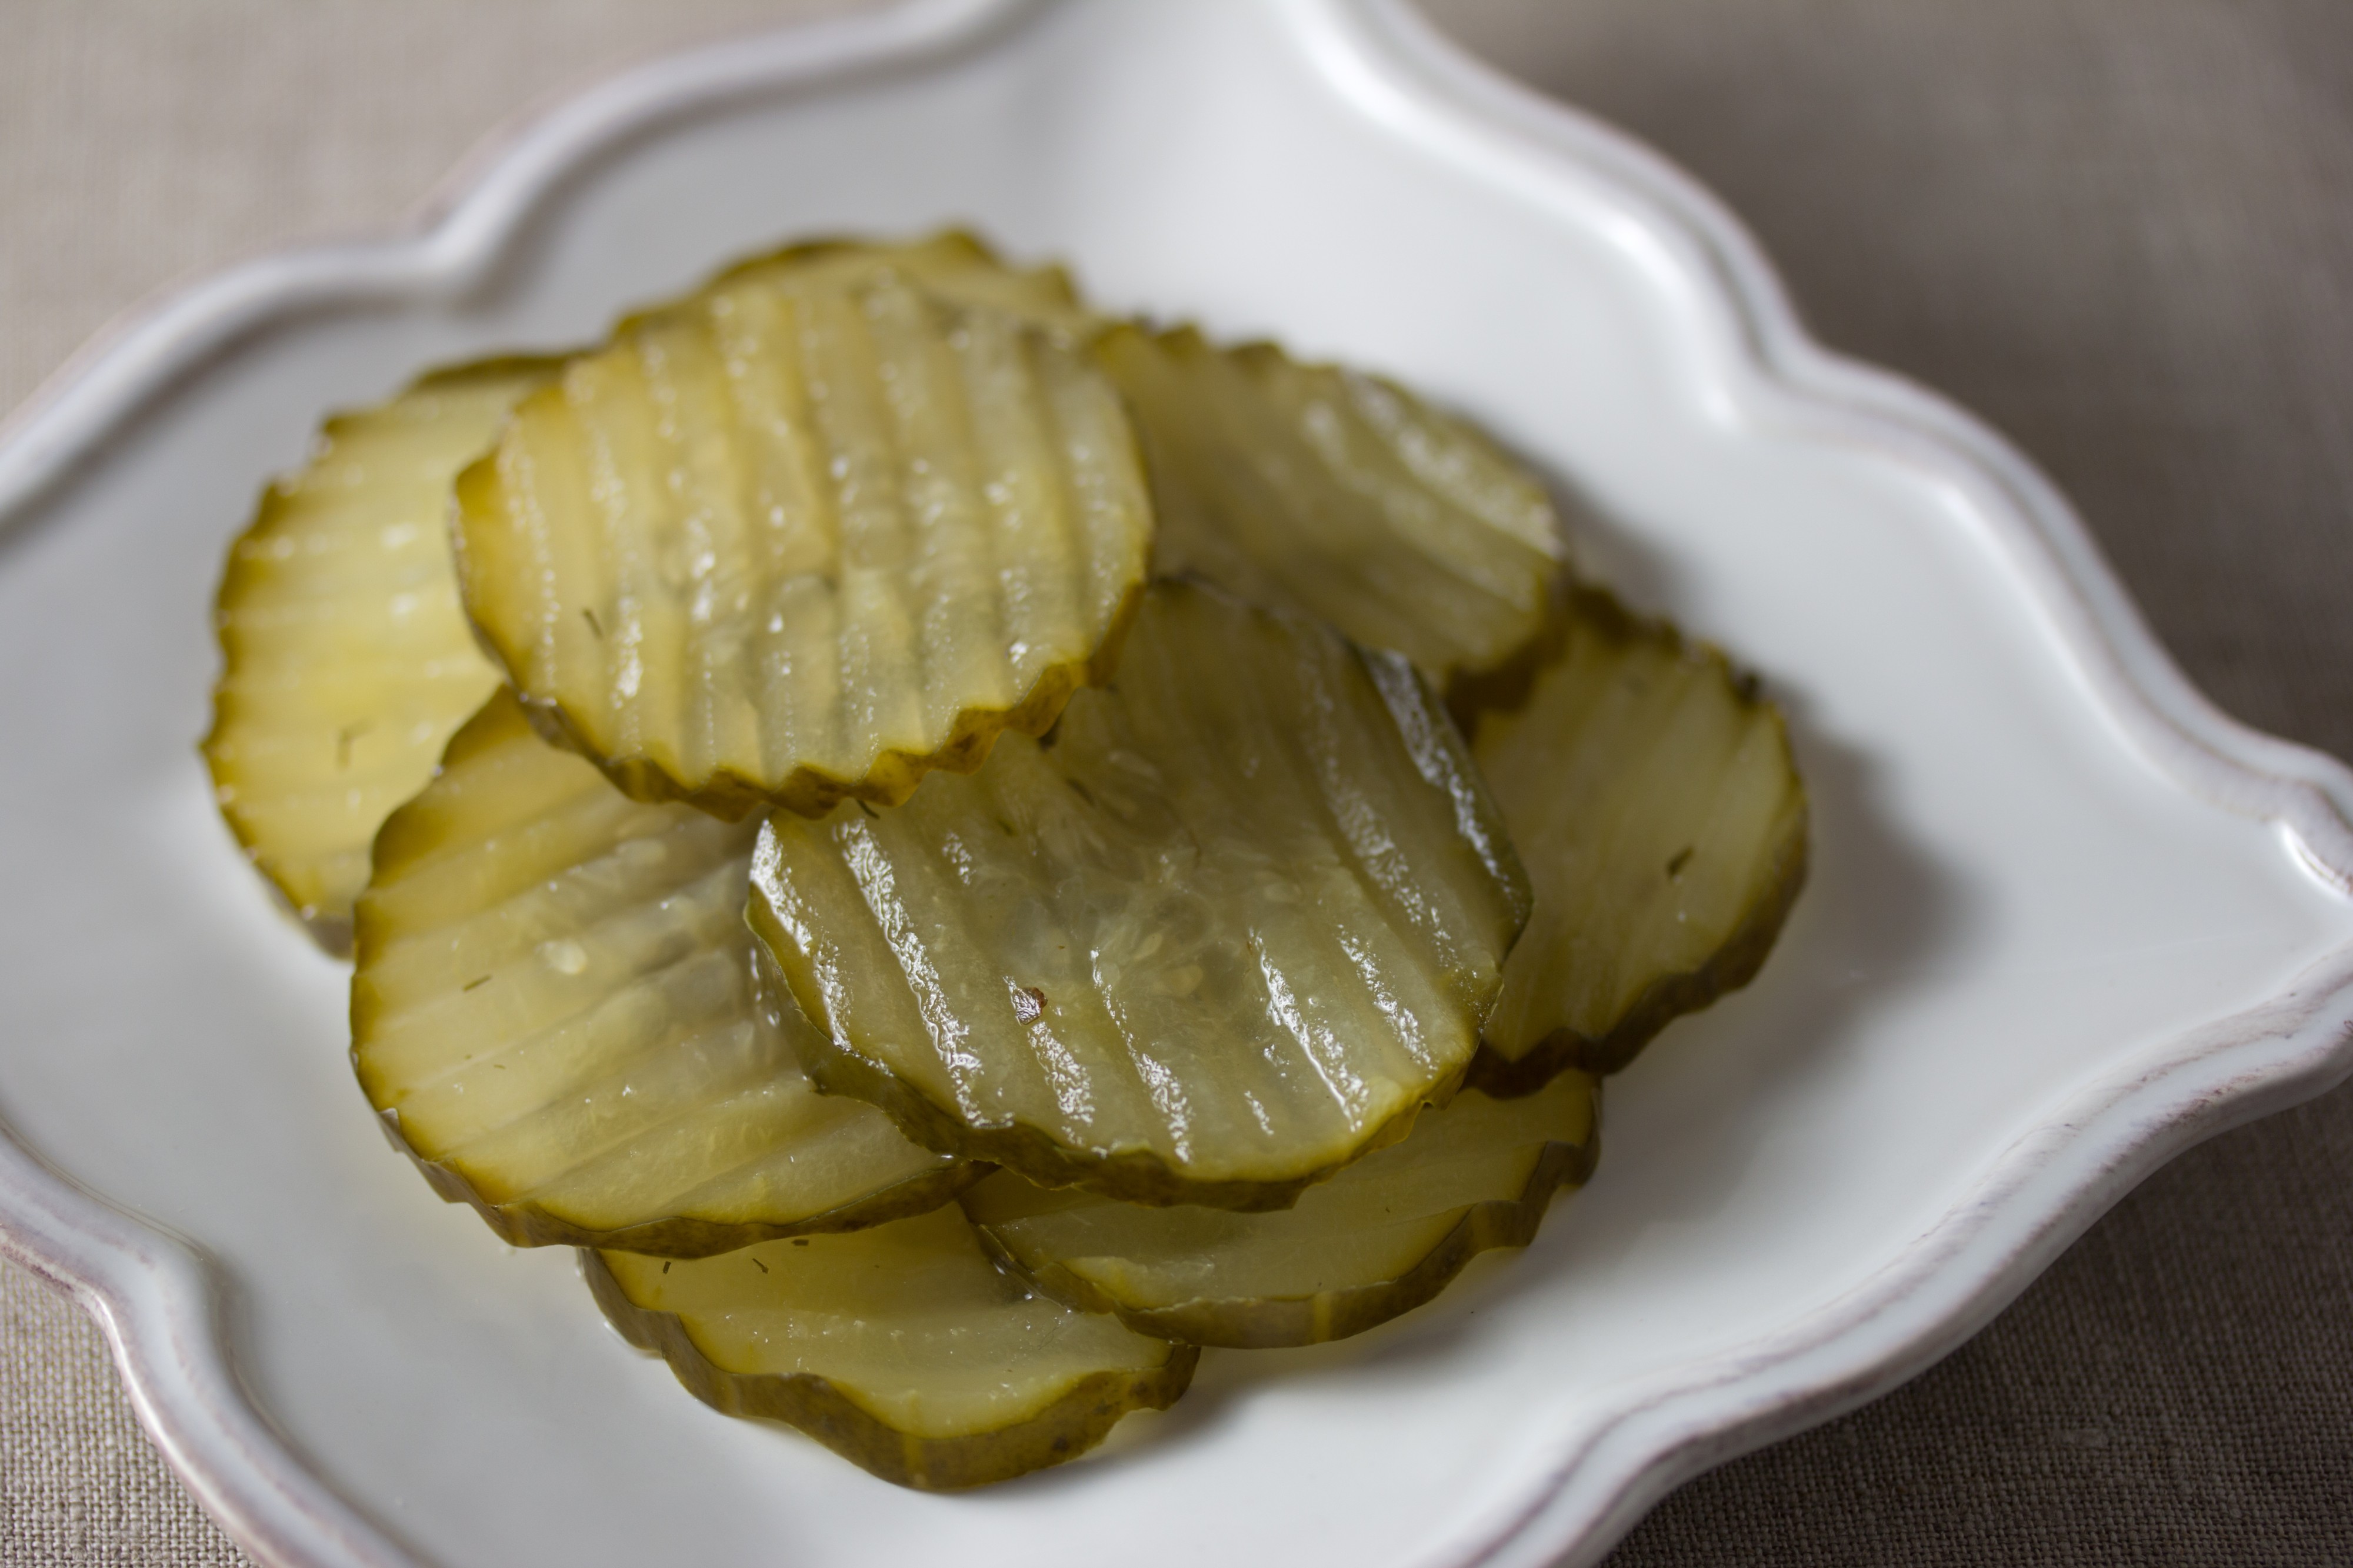 Wild Fermented Pickles (8723810636)